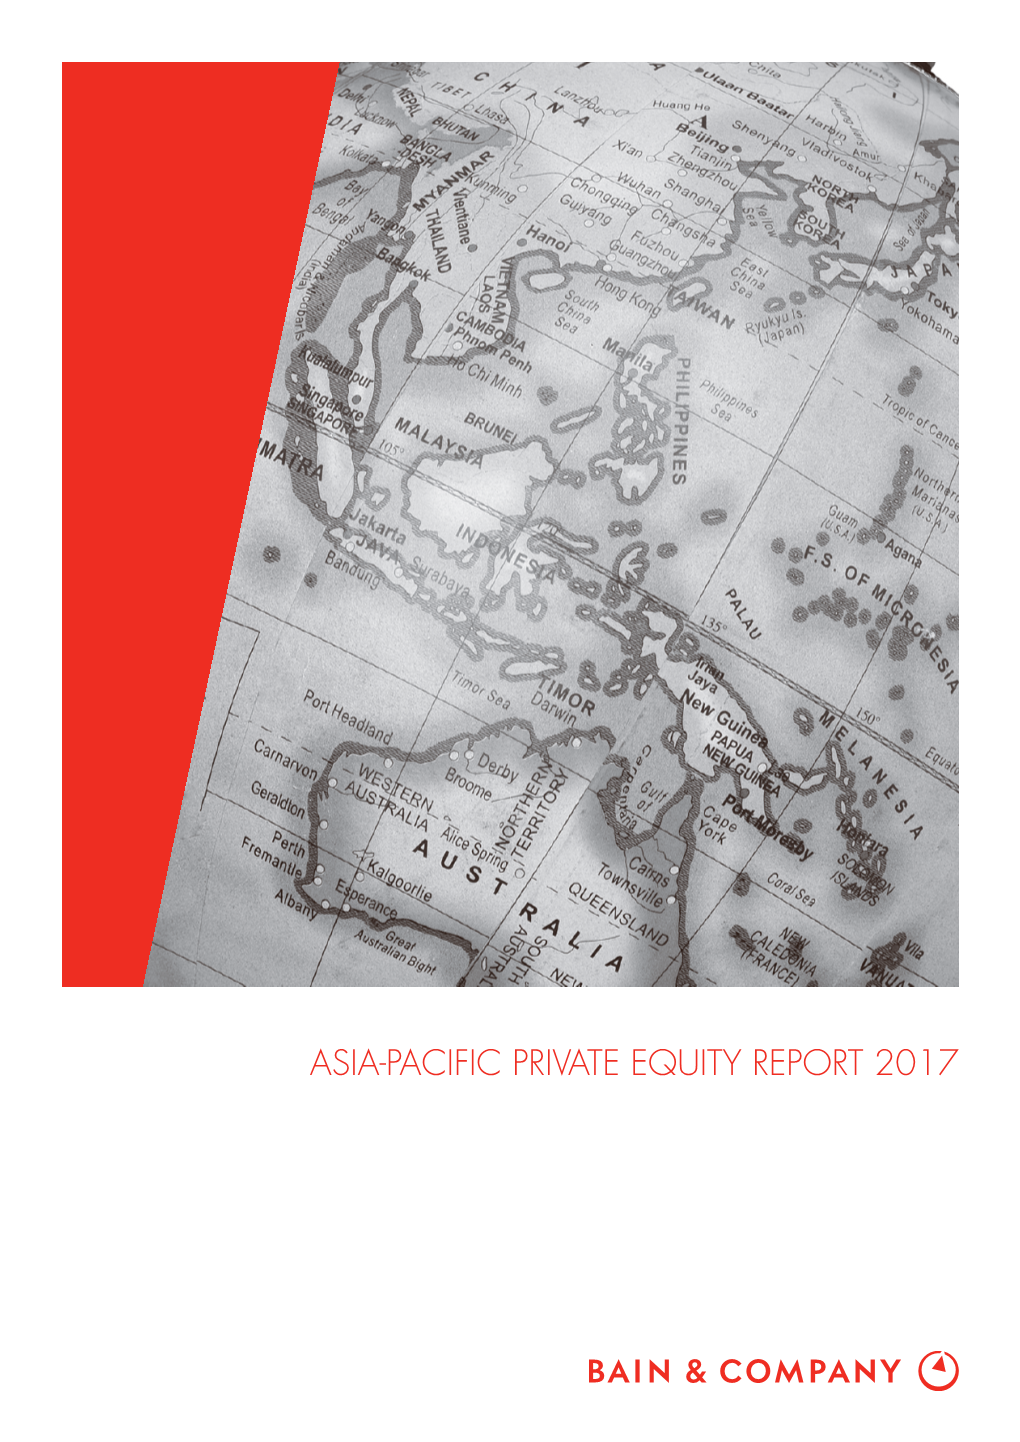 ASIA-PACIFIC PRIVATE EQUITY REPORT 2017 About Bain & Company’S Private Equity Business